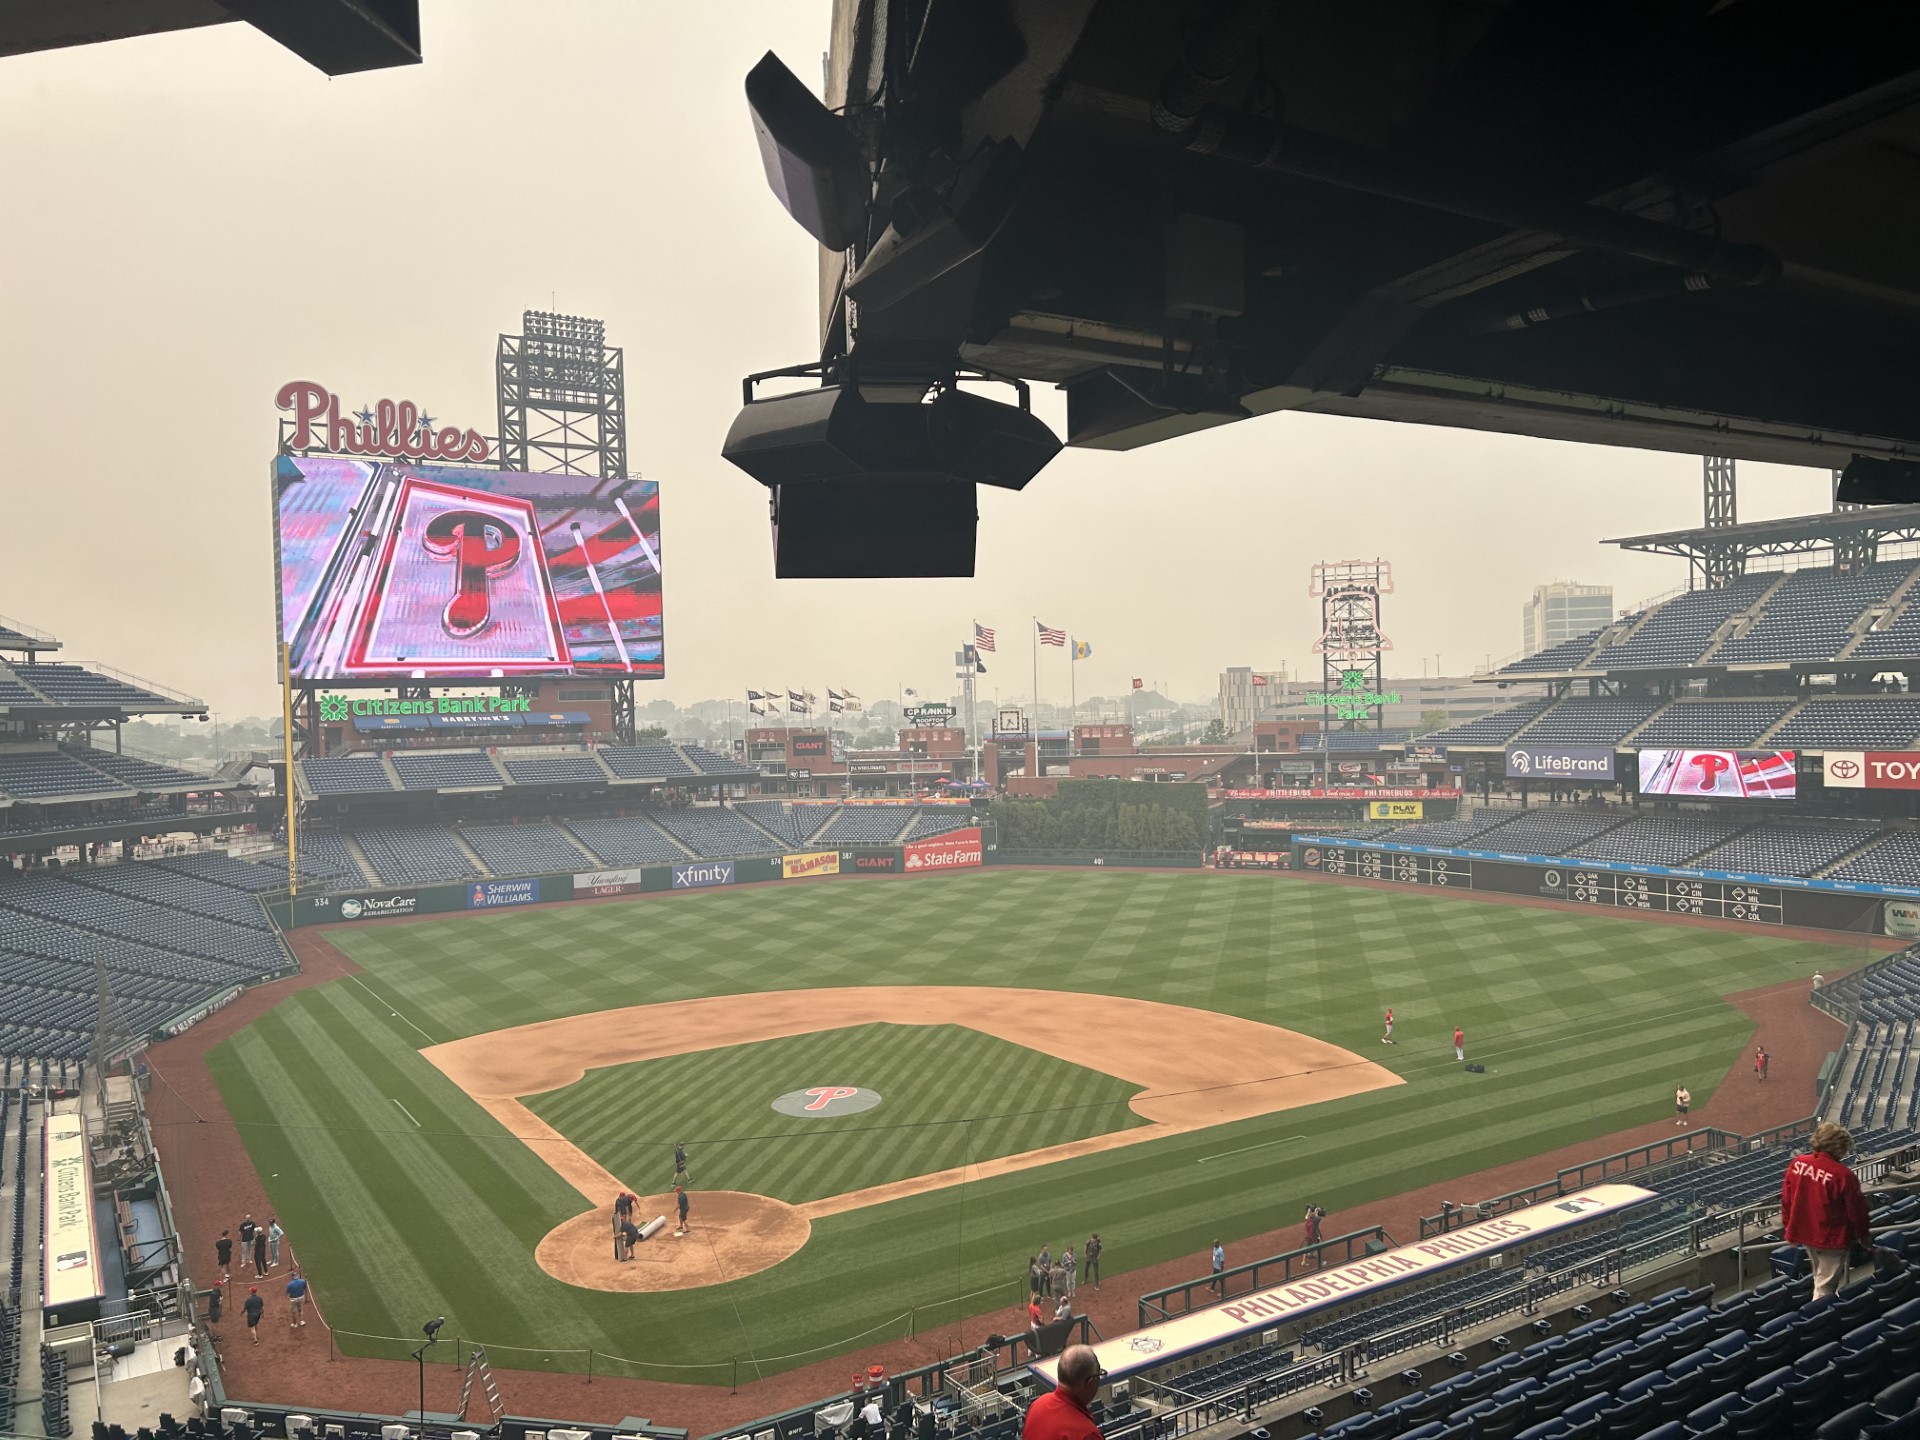 Phillies-Tigers game not postponed due to Philly's air quality